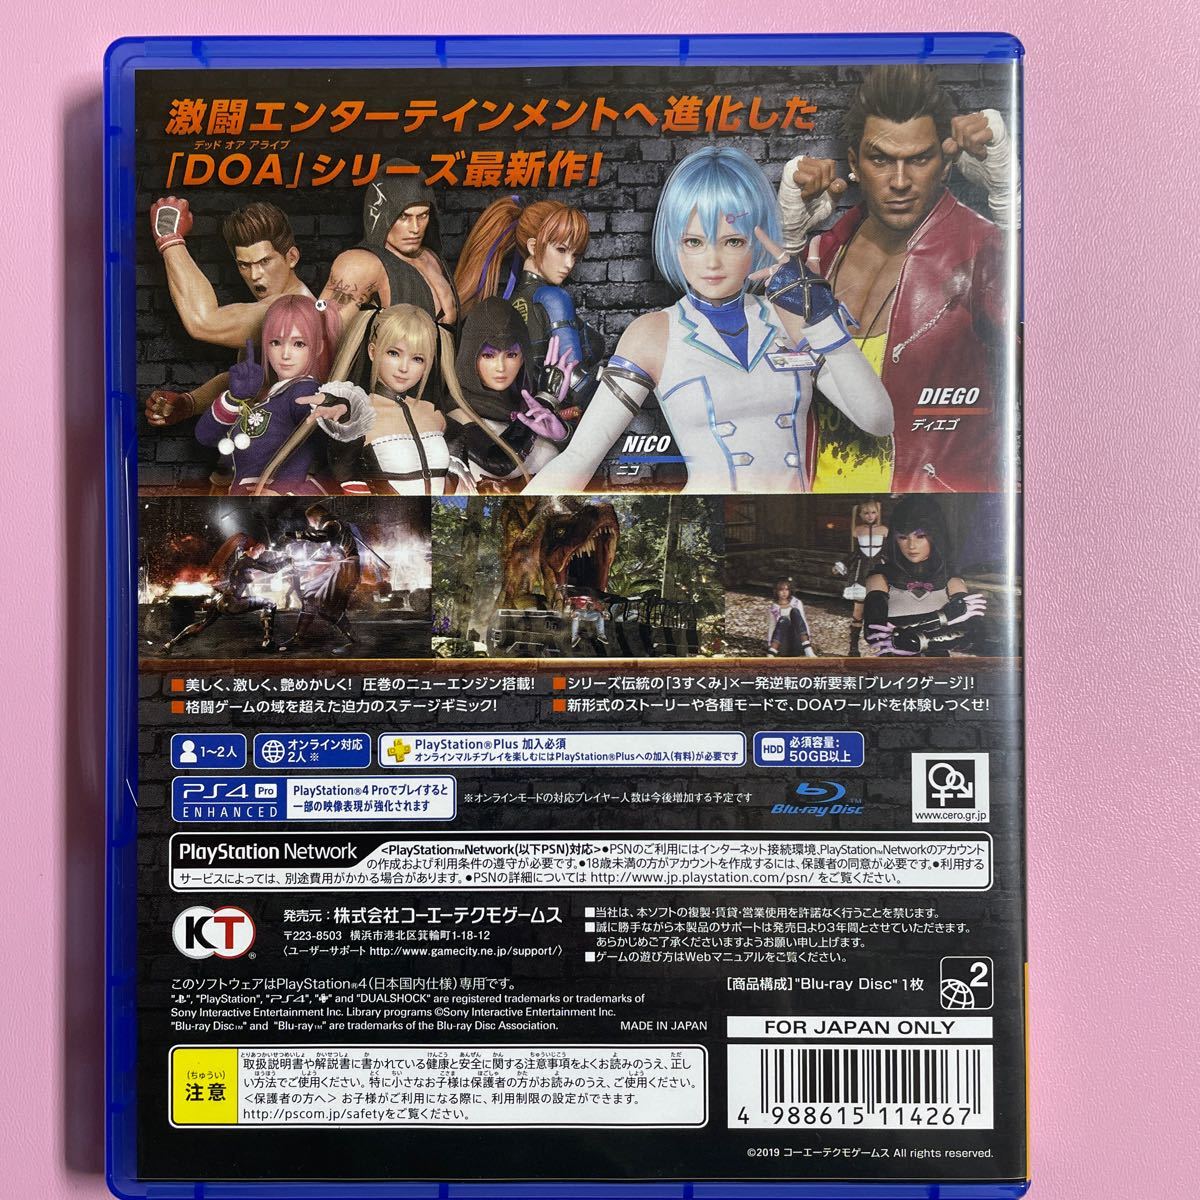 【PS4】 DEAD OR ALIVE 6 [通常版]